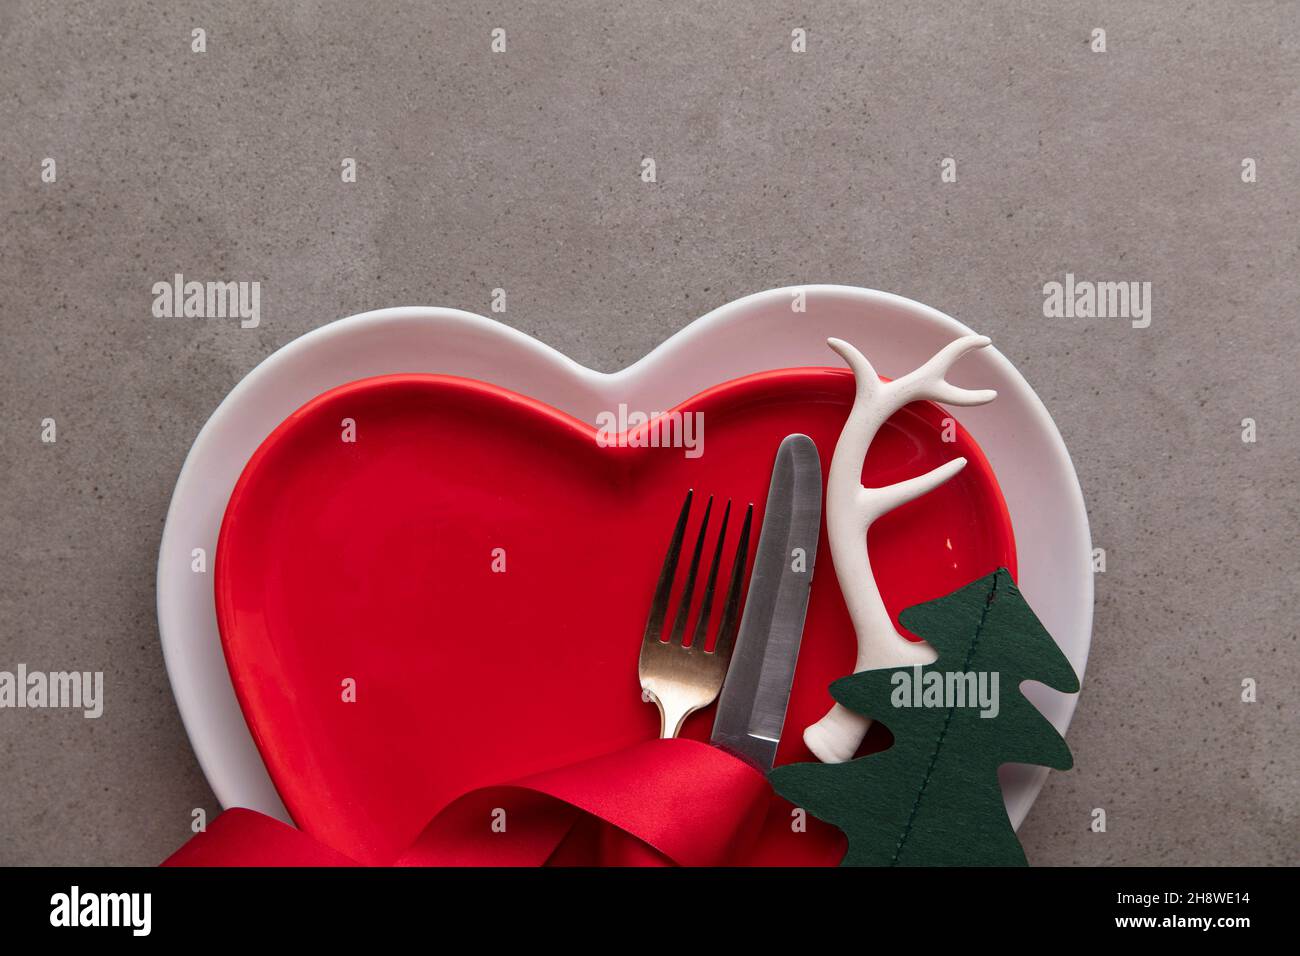 Festive Christmas meal background. Heart shaped plate with knife and fork and Christmas antler and tree decorations Stock Photo